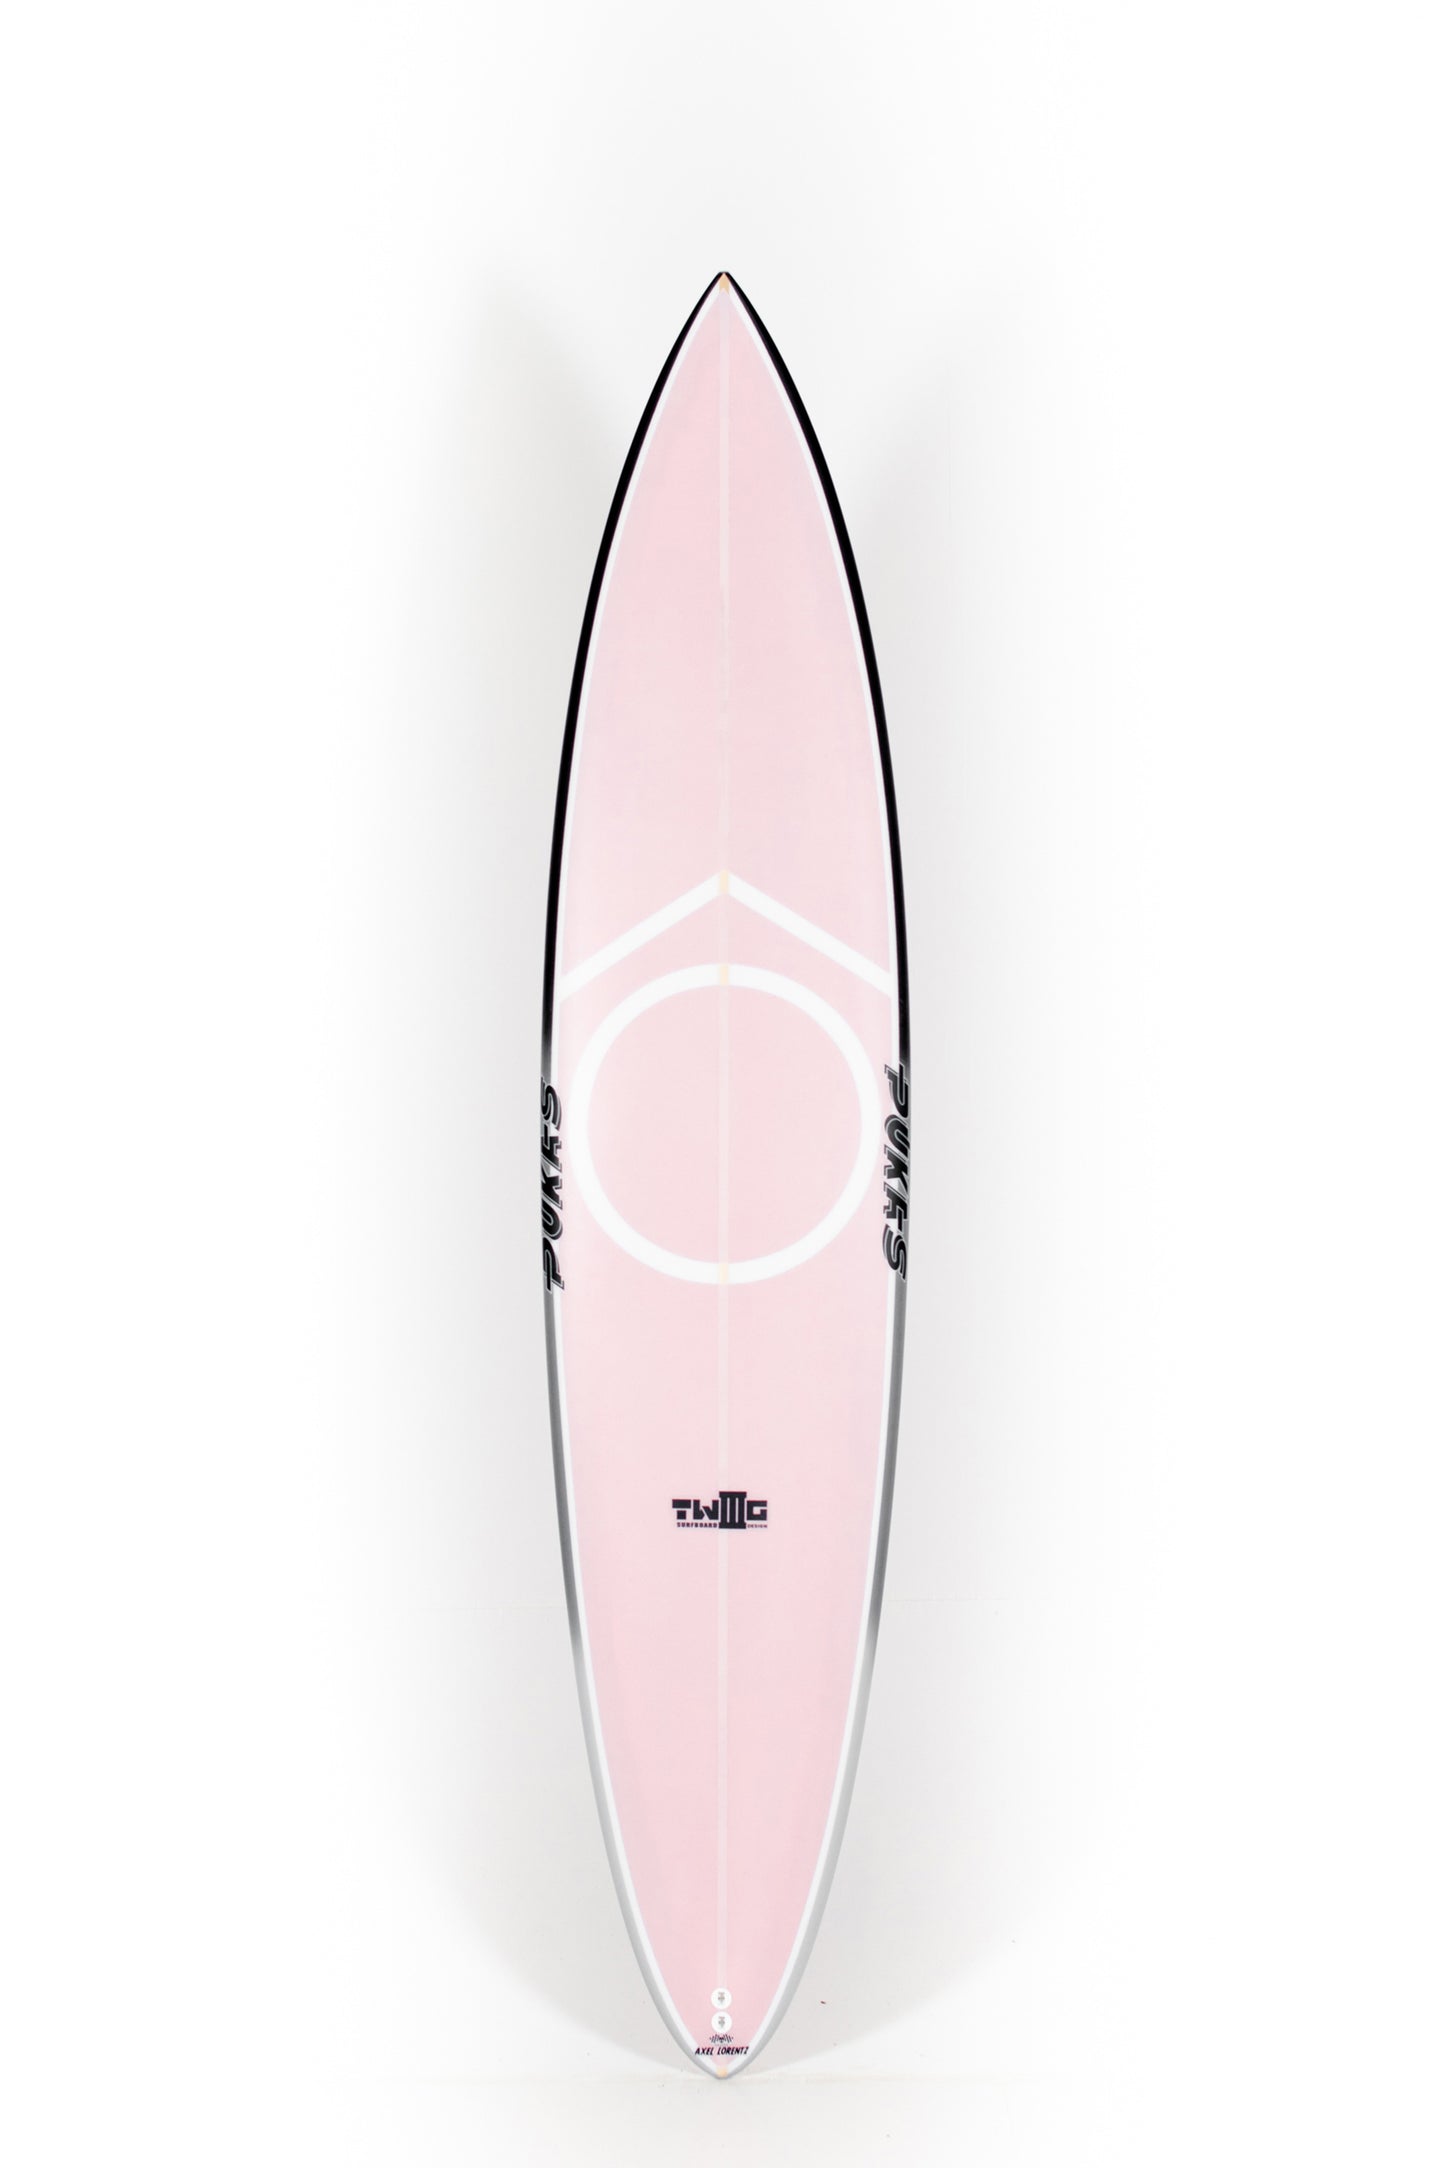 Pukas Surf shop - Pukas Surfboard - TWIG CHARGER by Axel Lorentz - 8´0” x 20,13 x 3,25 - 52,55L  AX06173